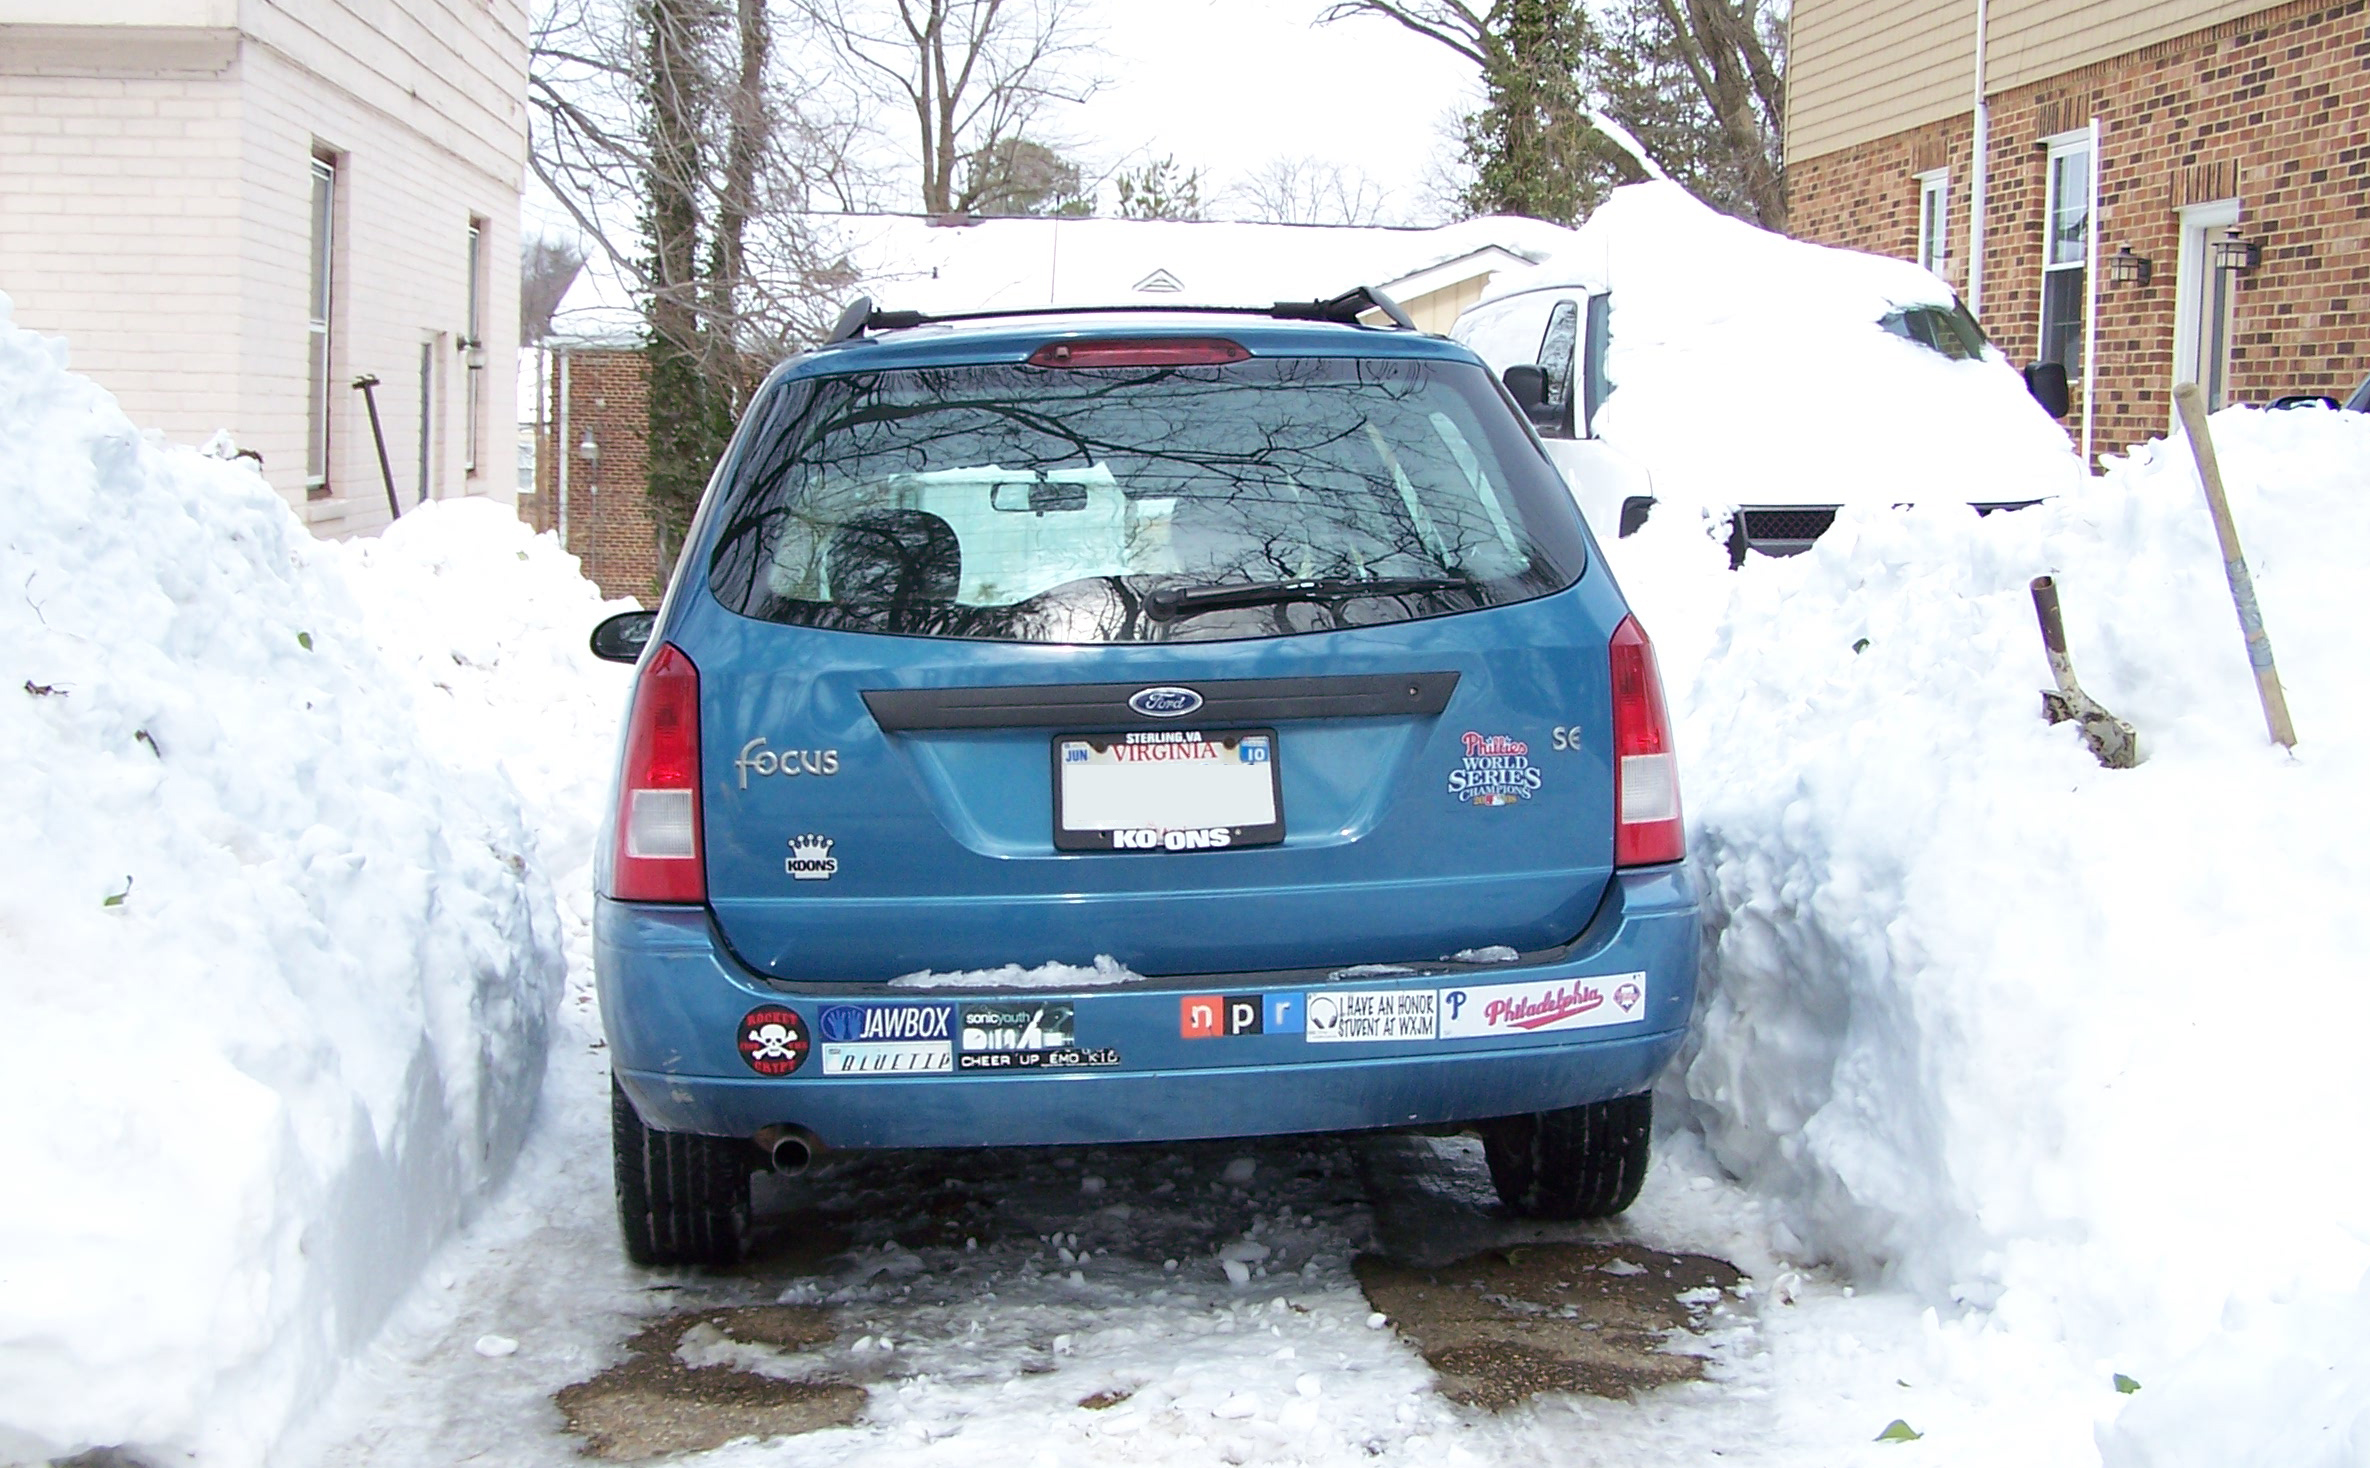 Photo of a car in a driveway cleared of snow, with snow piles around it